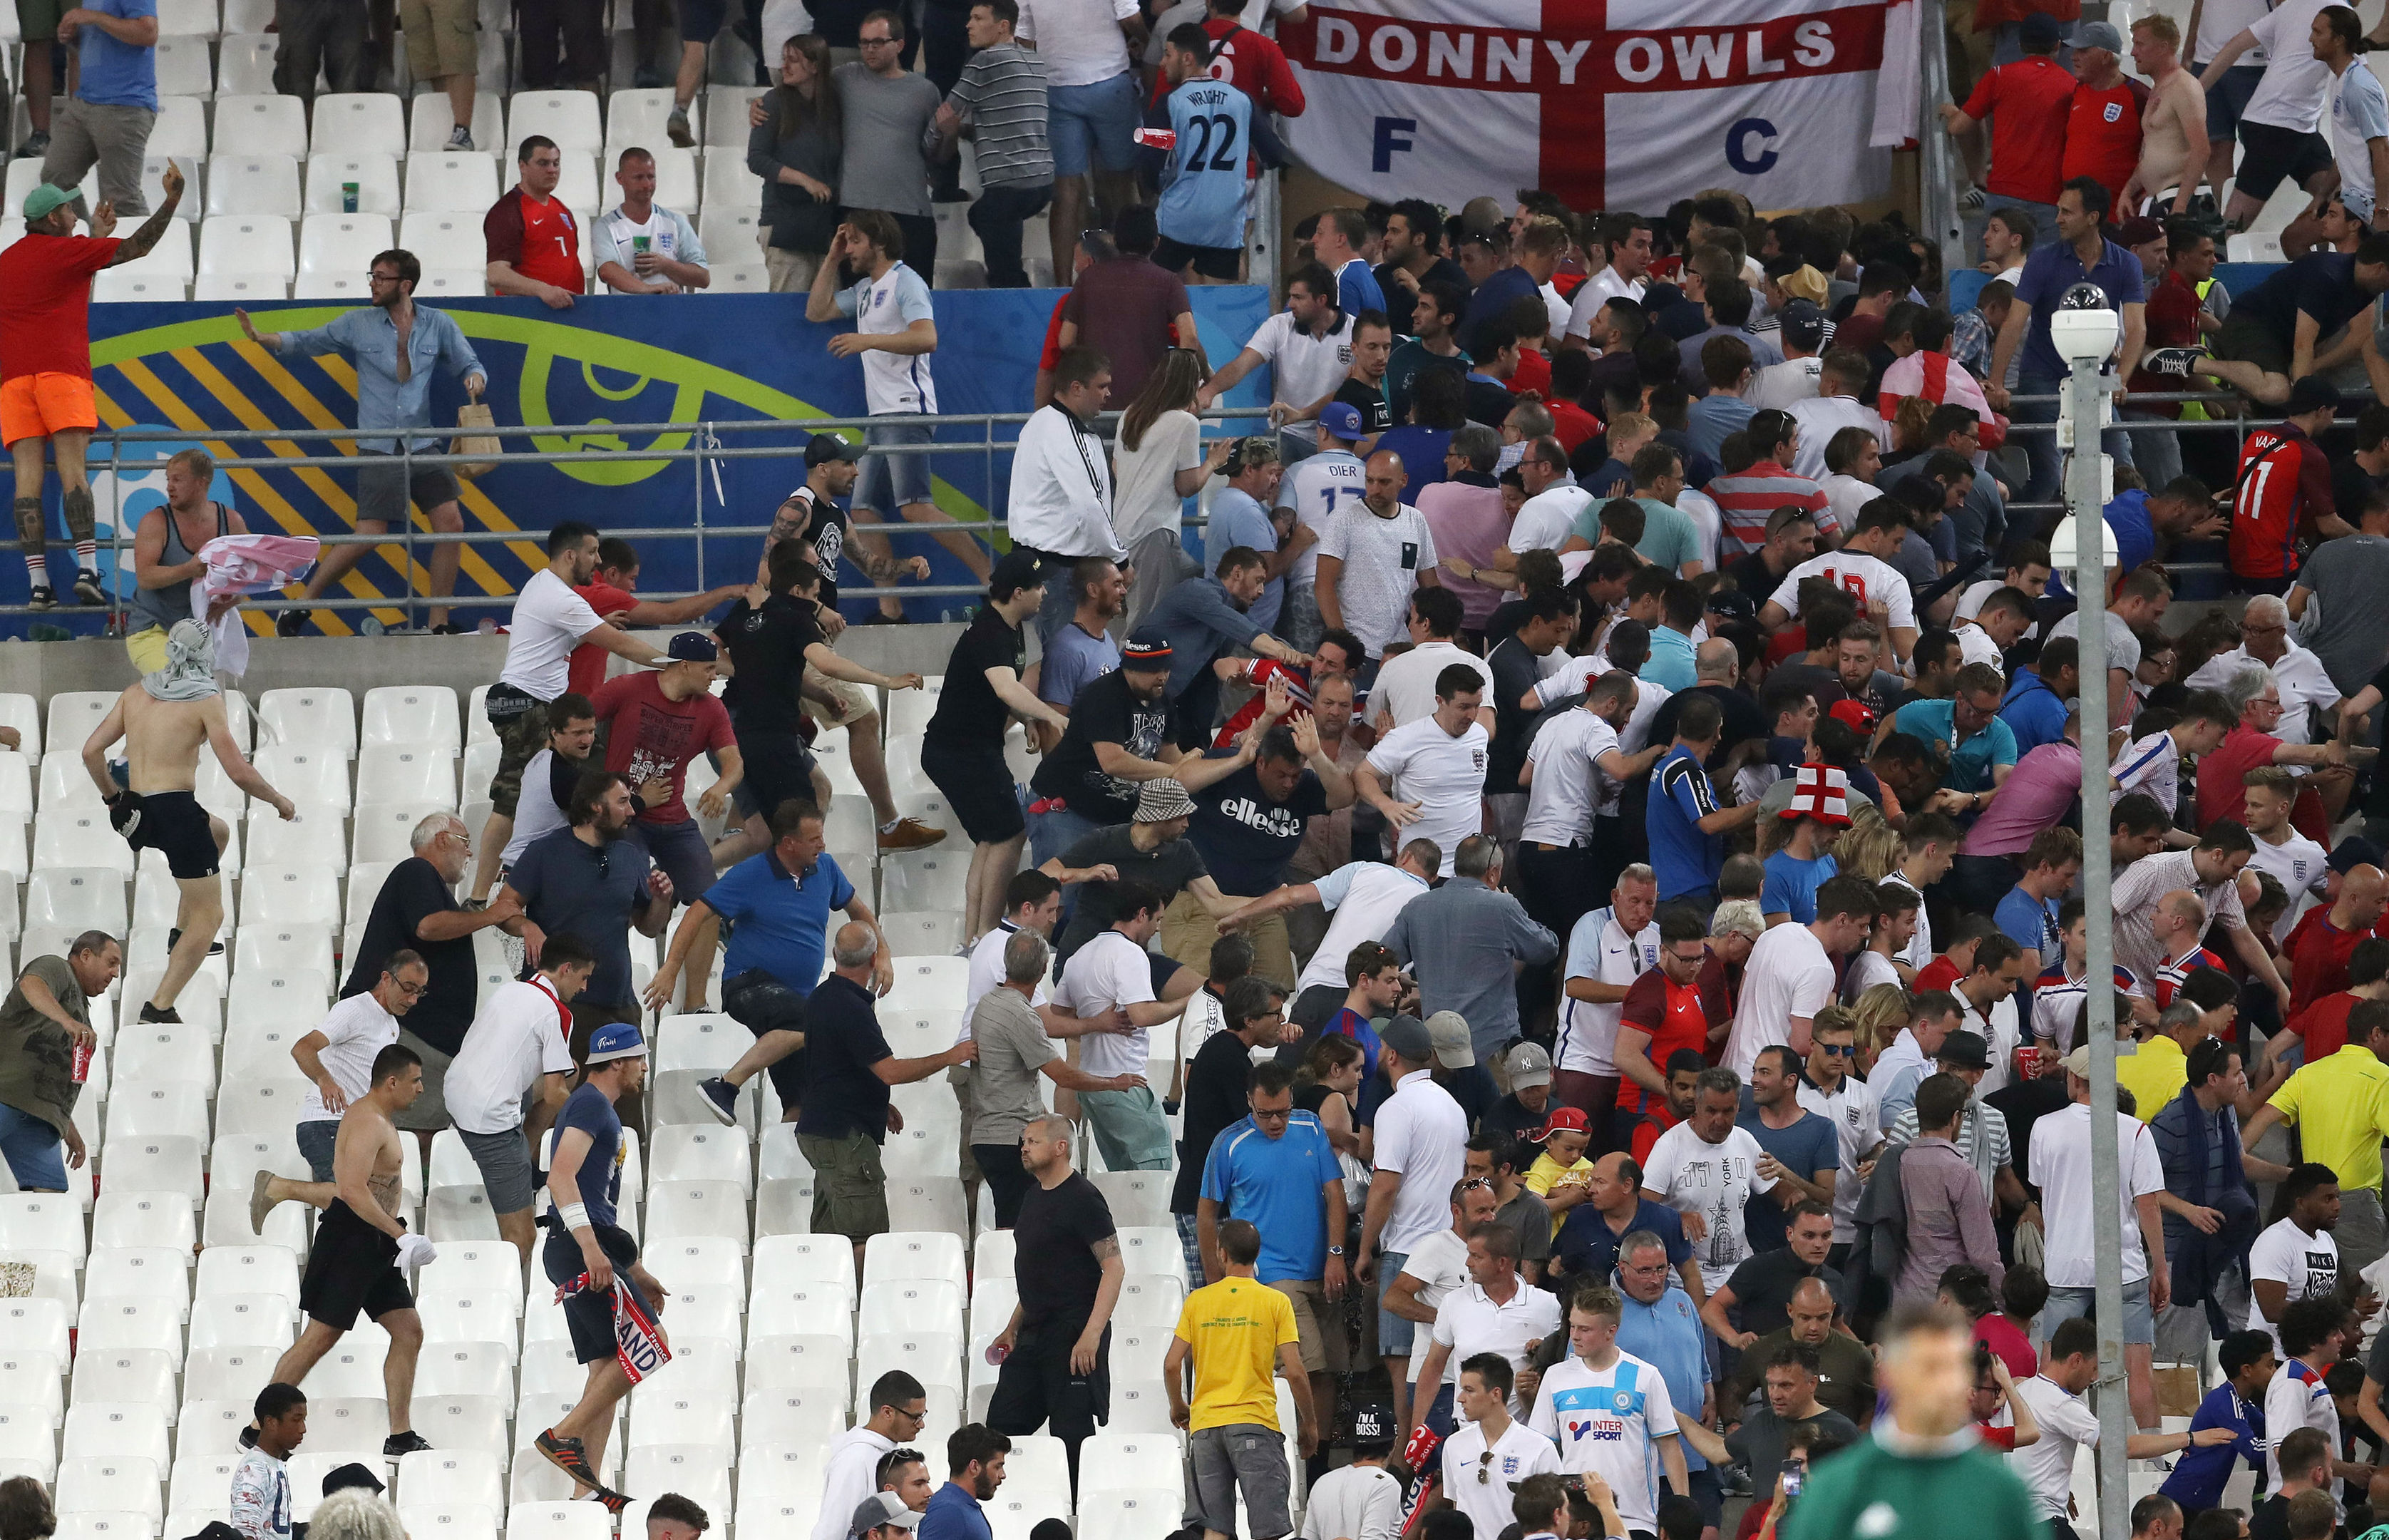 Tempers flare in the stands between Russia and England fans during their Euro 2016 match.